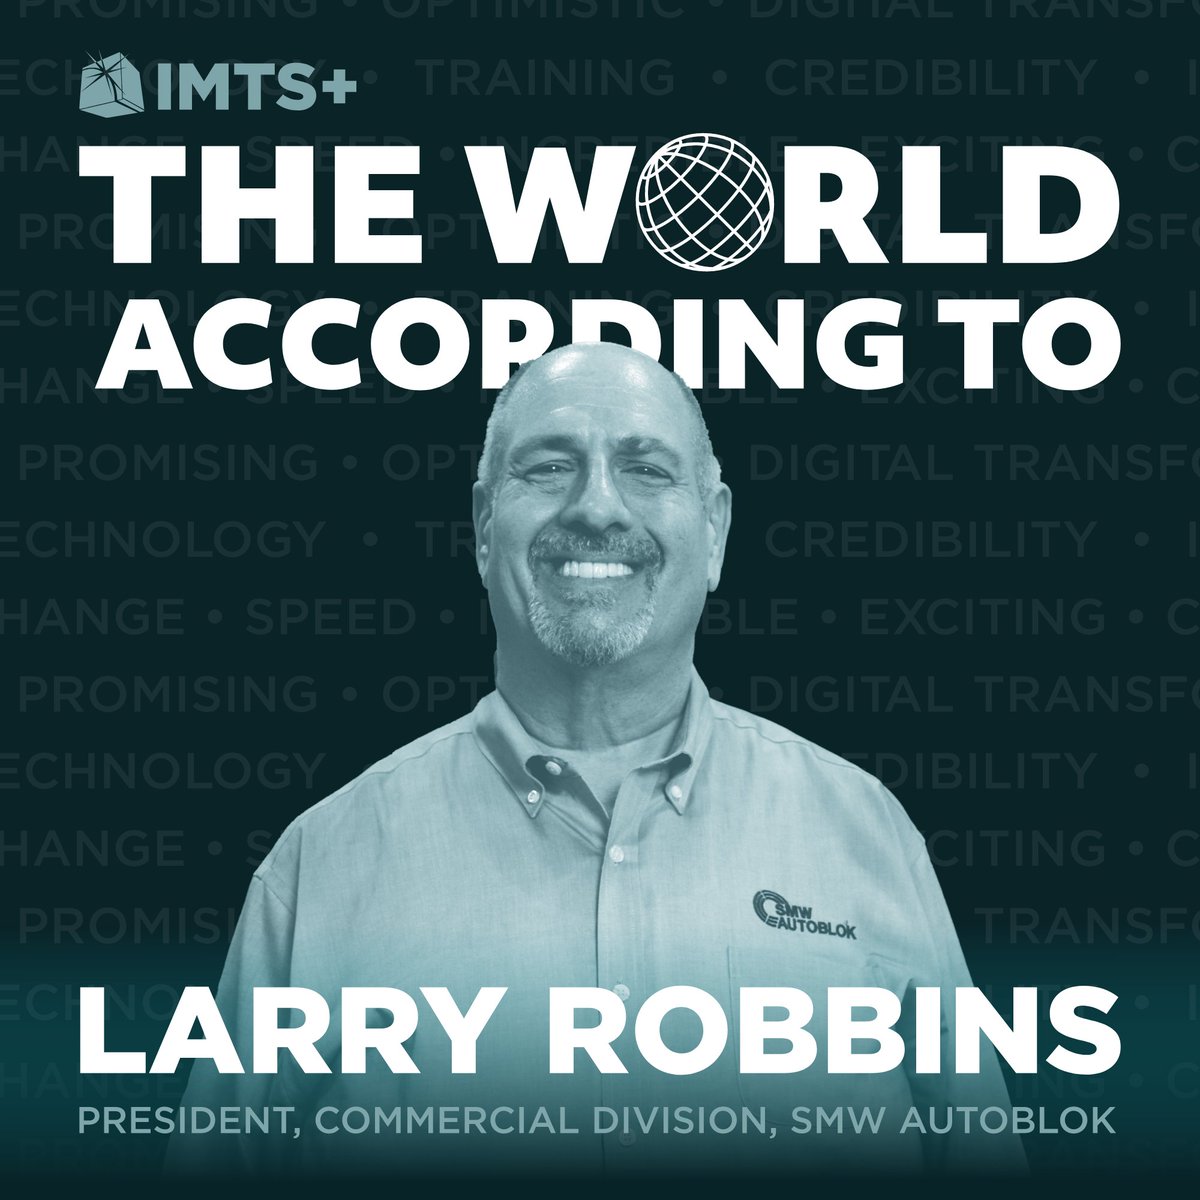 We're only one day away from seeing The World According To...Larry Robbins! Check back tomorrow to see the world premiere of Larry Robins of SMW Autoblok's episode of the IMTS+ series. You can also read more about the episode here: bit.ly/44wNAFX